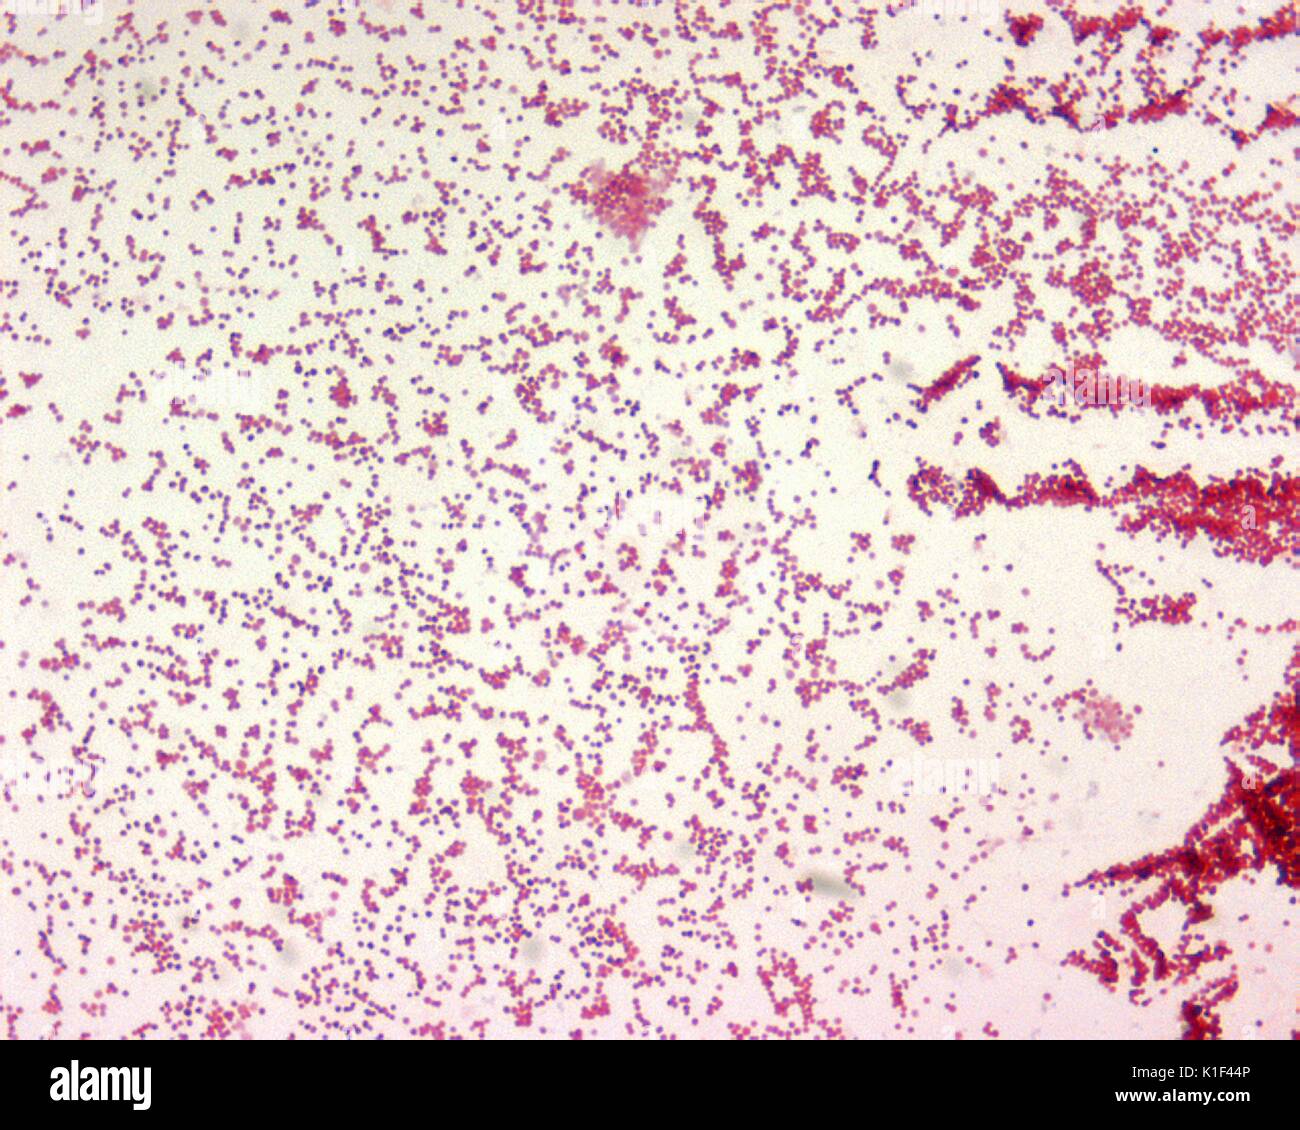 Francisella tularensis is Gram-negative in its staining morphology. Francisella tularensis is a poorly staining, very tiny gram-negative coccobacillus (0.2-0.7 {micro}m), seen mostly as single cells. Bipolar staining is not a distinctive feature. Image courtesy CDC/Courtesy of Larry Stauffer, Oregon State Public Health Laboratory, 2002. Stock Photo